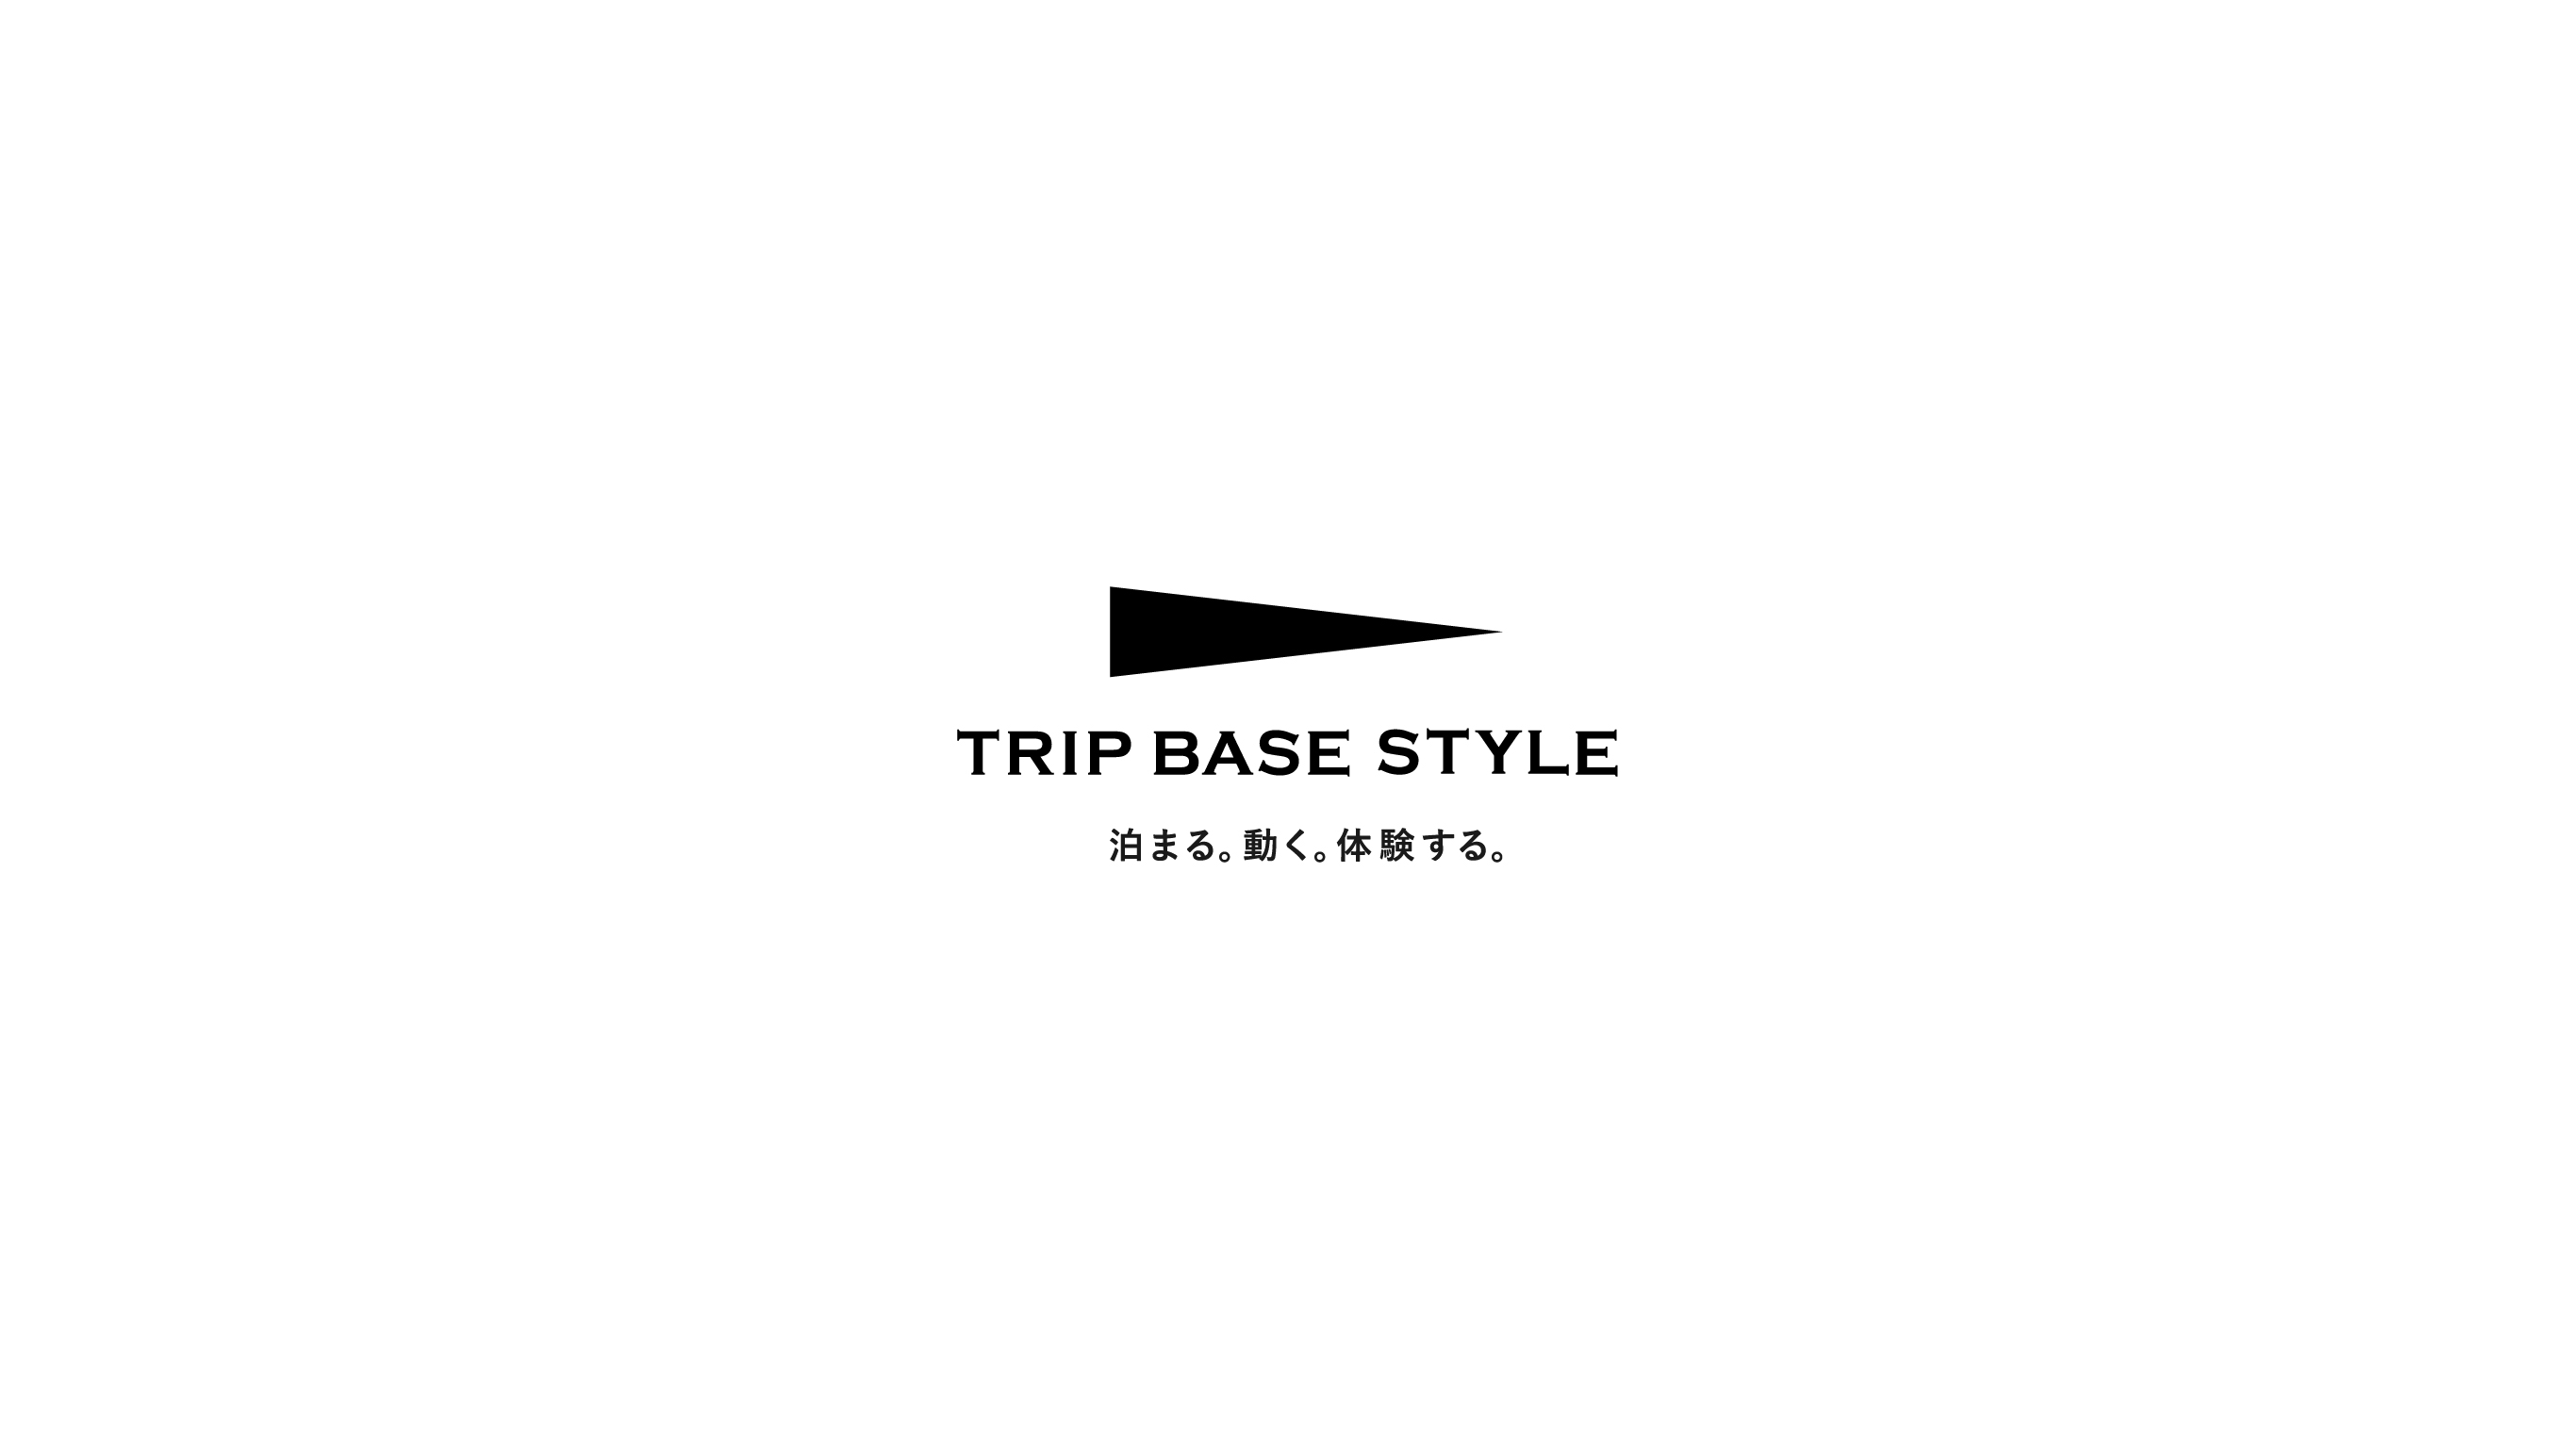 TripBaseStyle